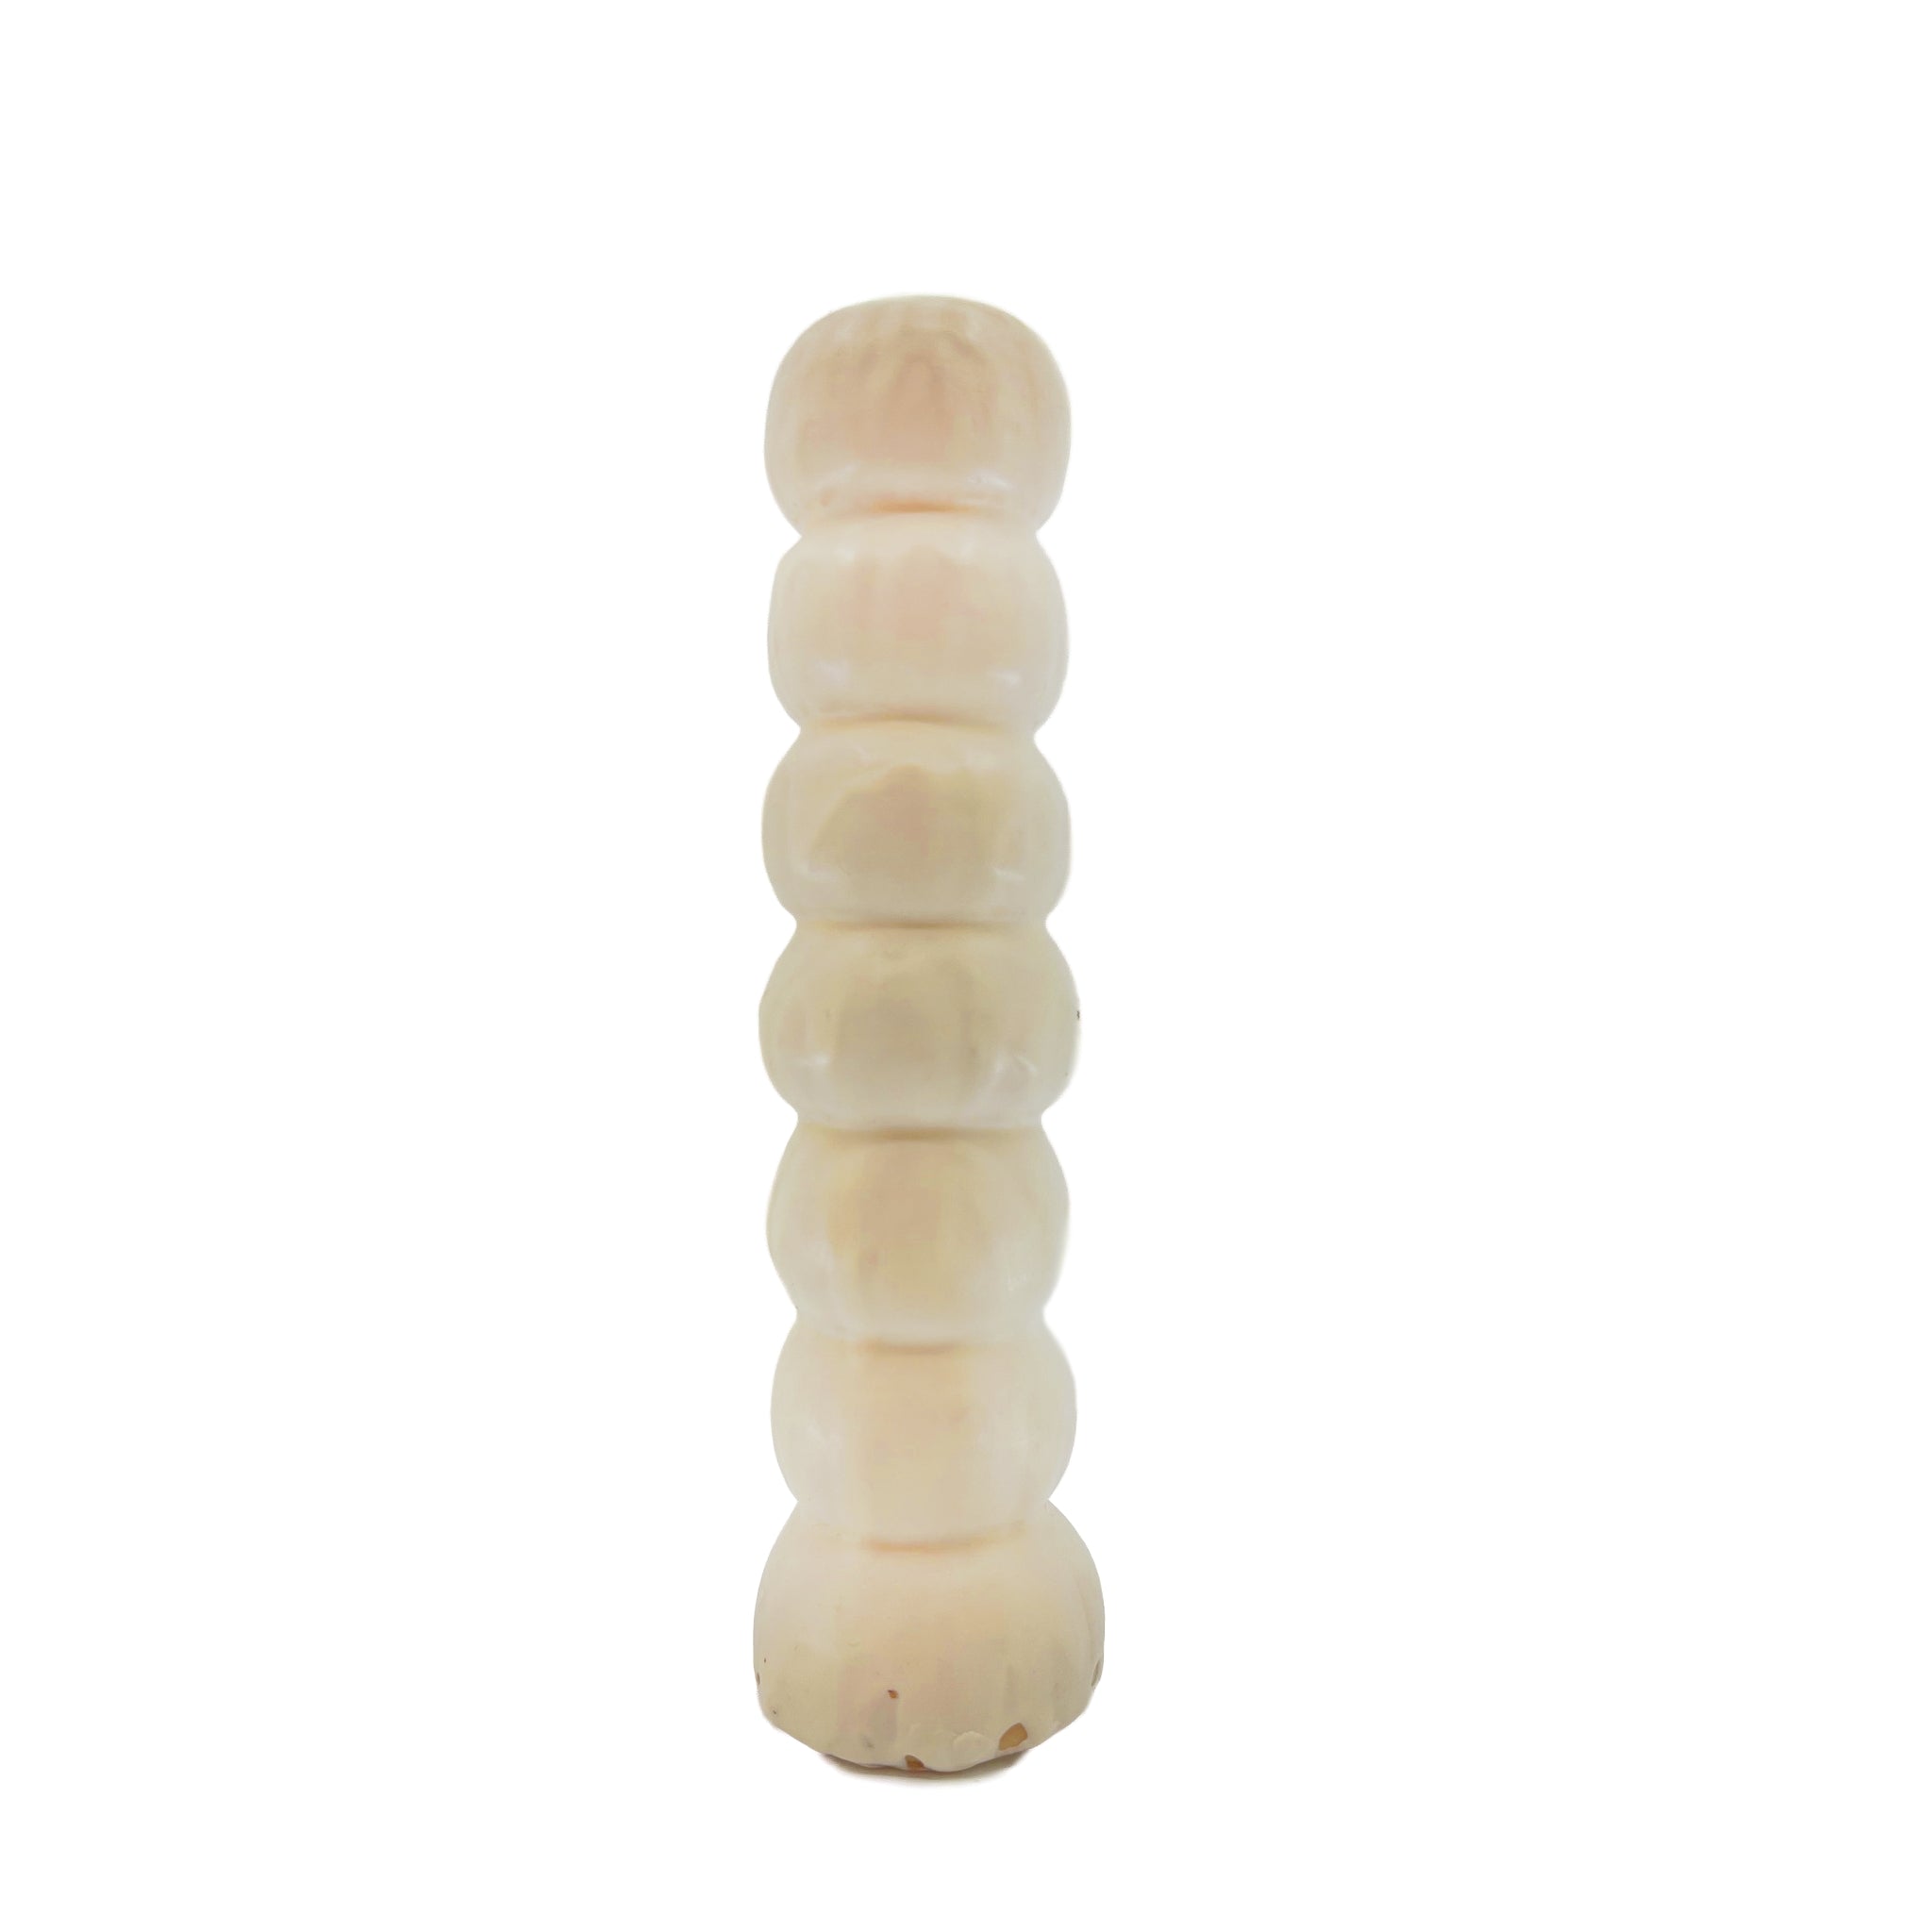 7 Day White Knob Candle